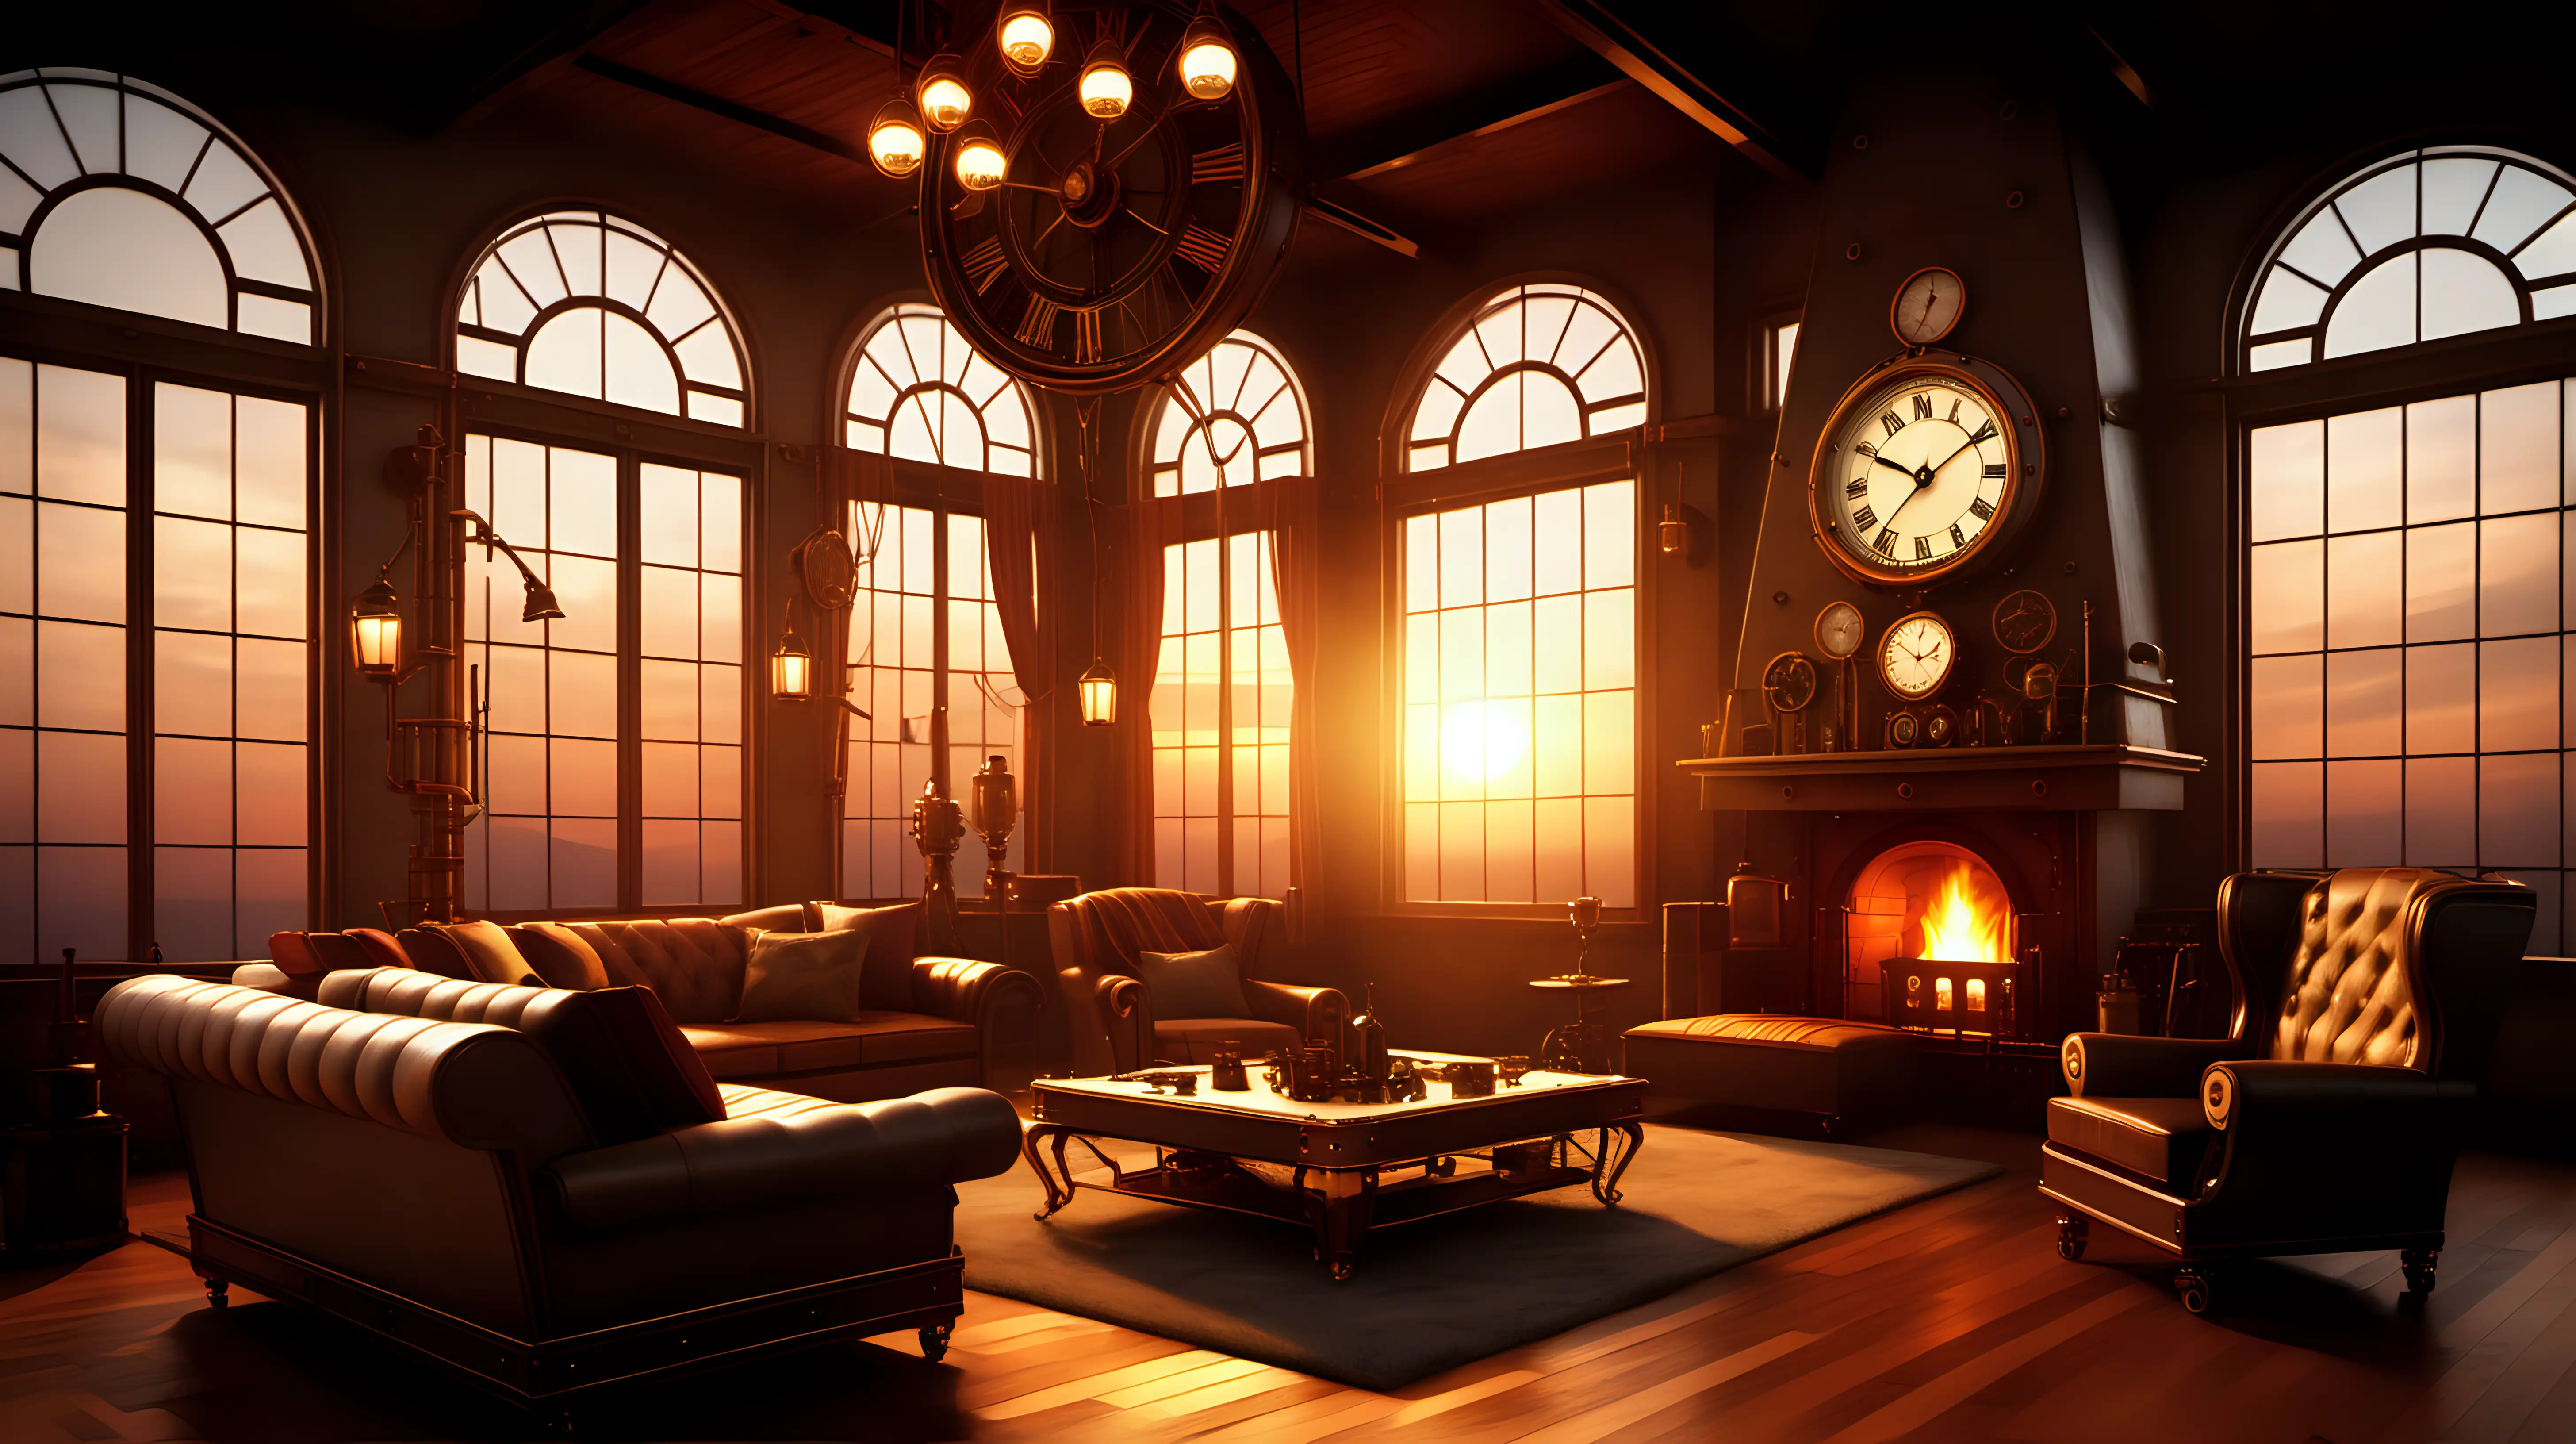 A Steampunk living room with two-story ceilings, one fireplace and windows at sunset, warm lighting, photo-realistic quality.